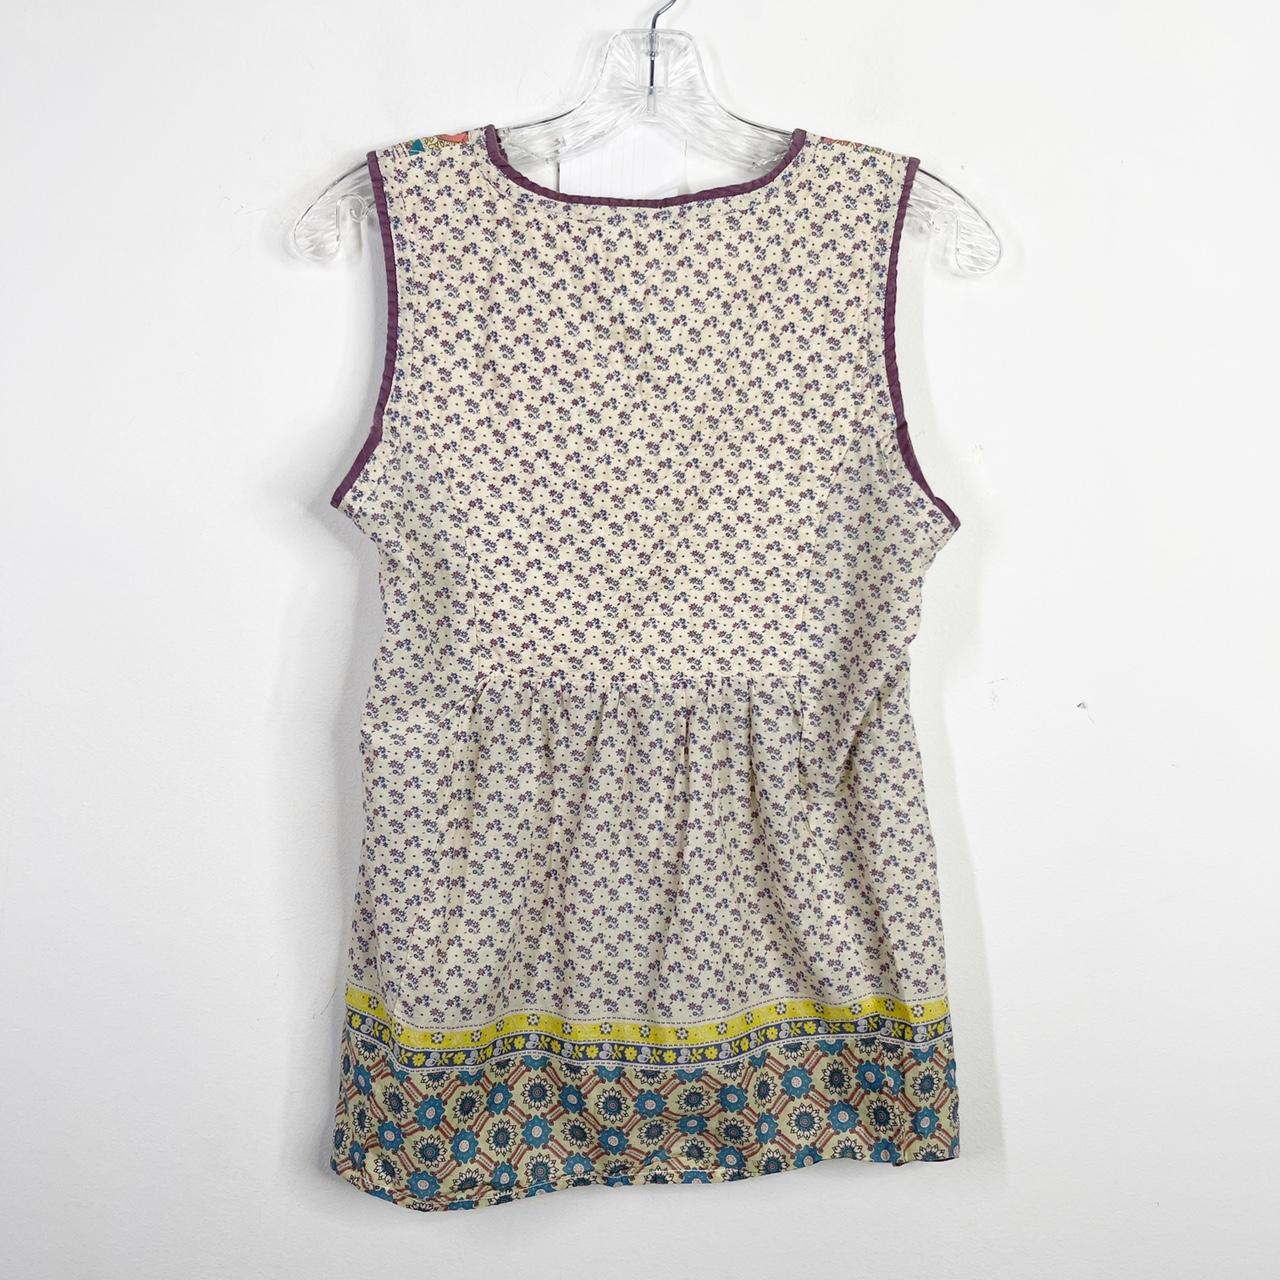 Product Image 2 - Great tank from House of